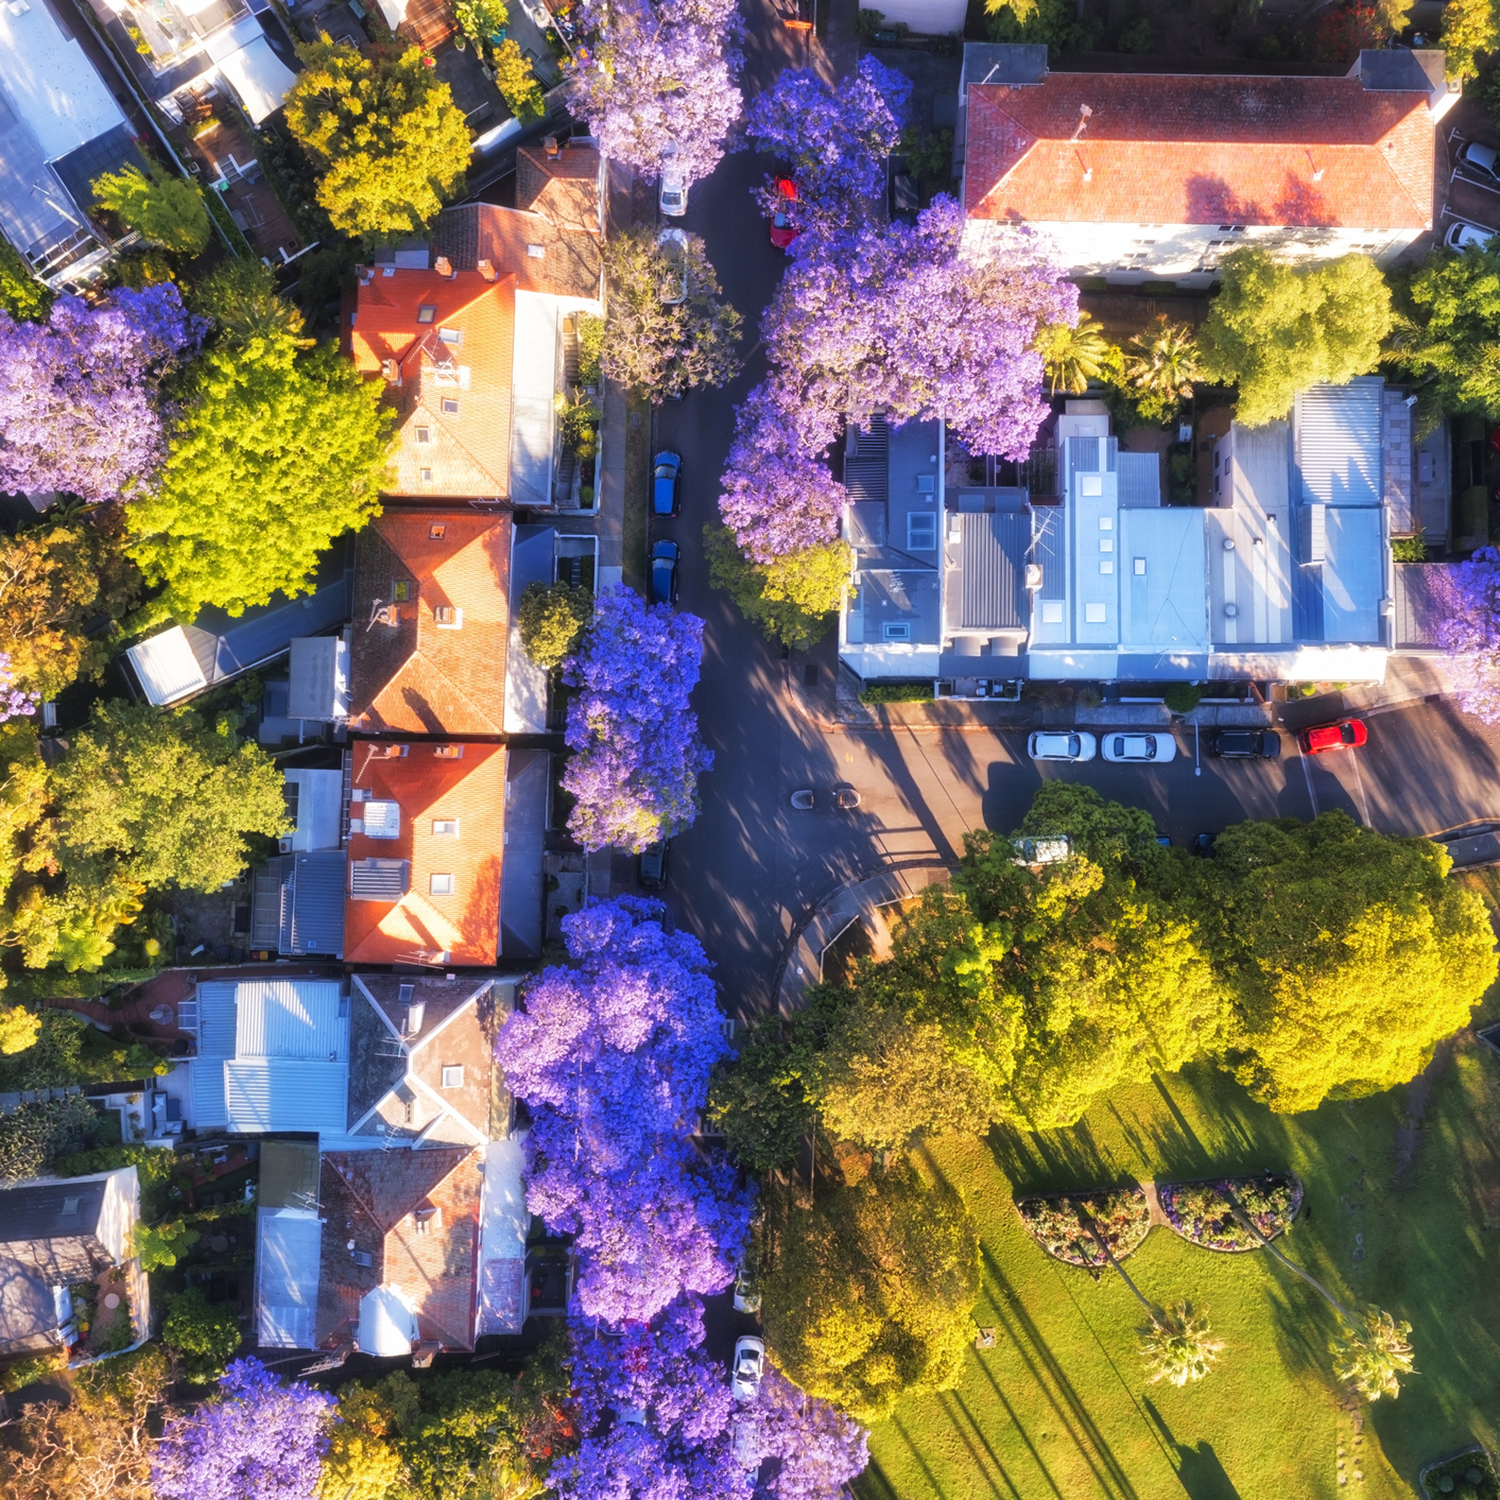 Green leafy park and quiet residential streets in Kirribilli suburb of Sydney during jacaranda blossoming season - aerial top down view.